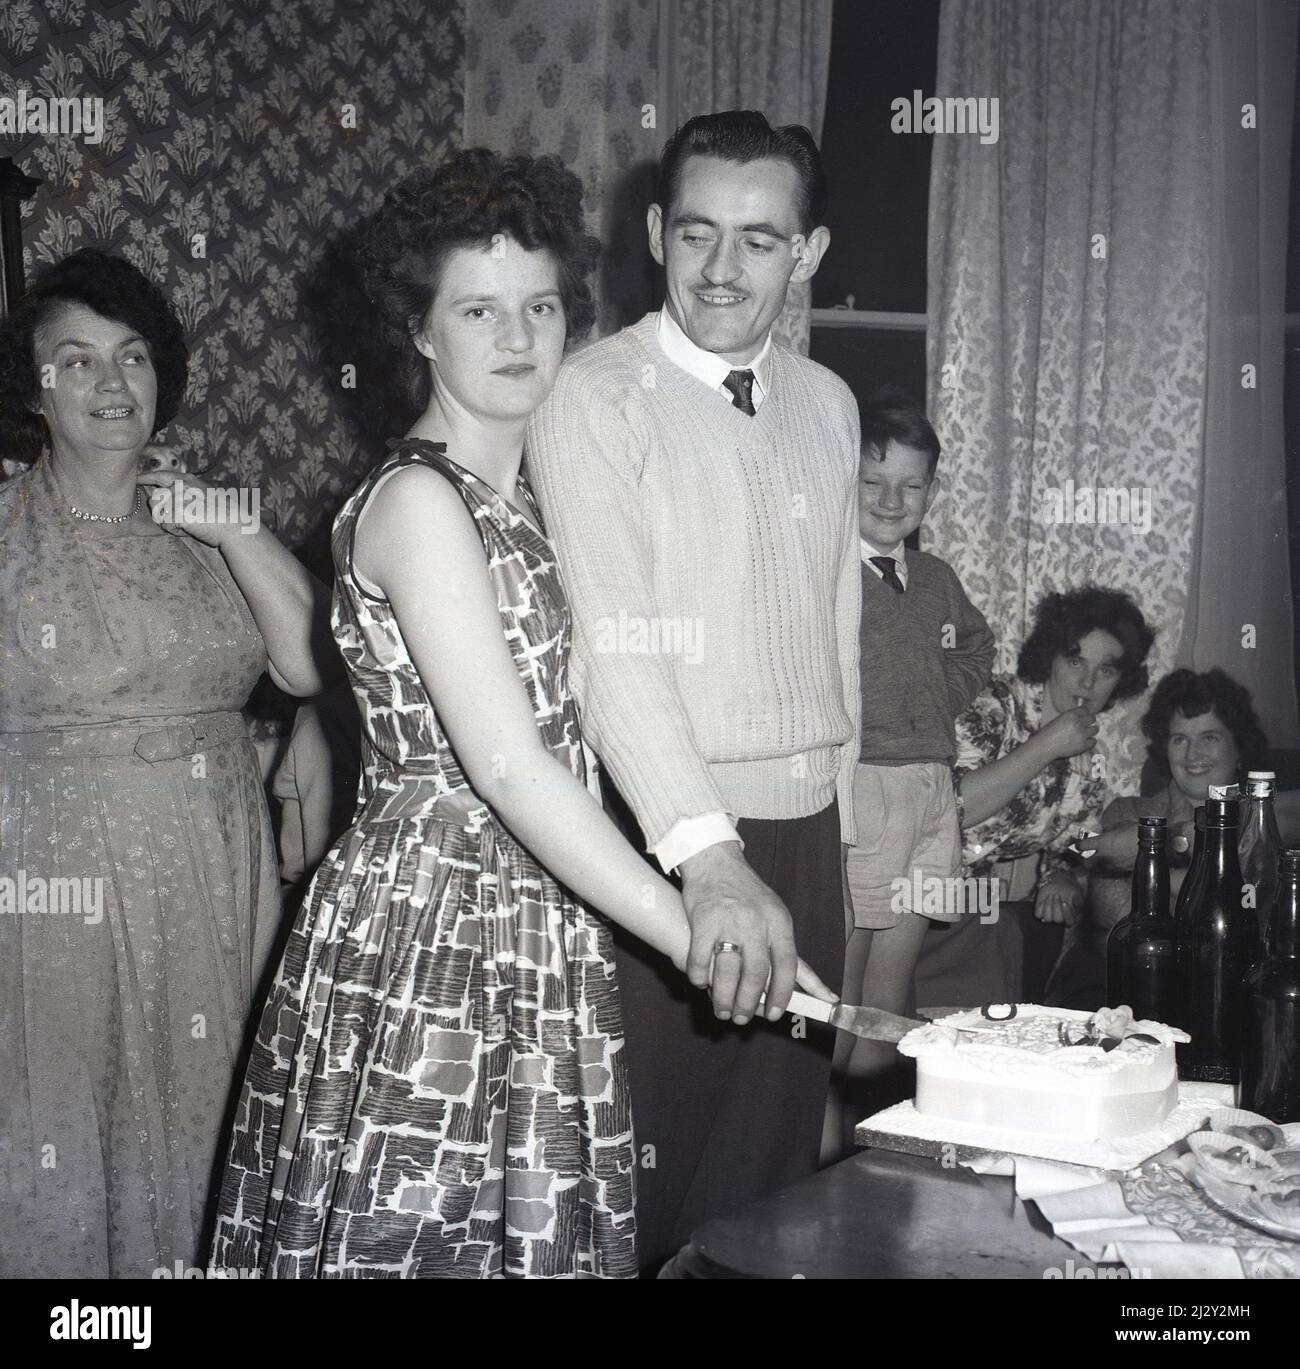 1961, historical, engagement party, inside a room at a house, a young woman wearing a sleeveless dress of the era, with her older fiance, standing cutting their celebration cake together, Stockport, Manchester, England, UK. Stock Photo